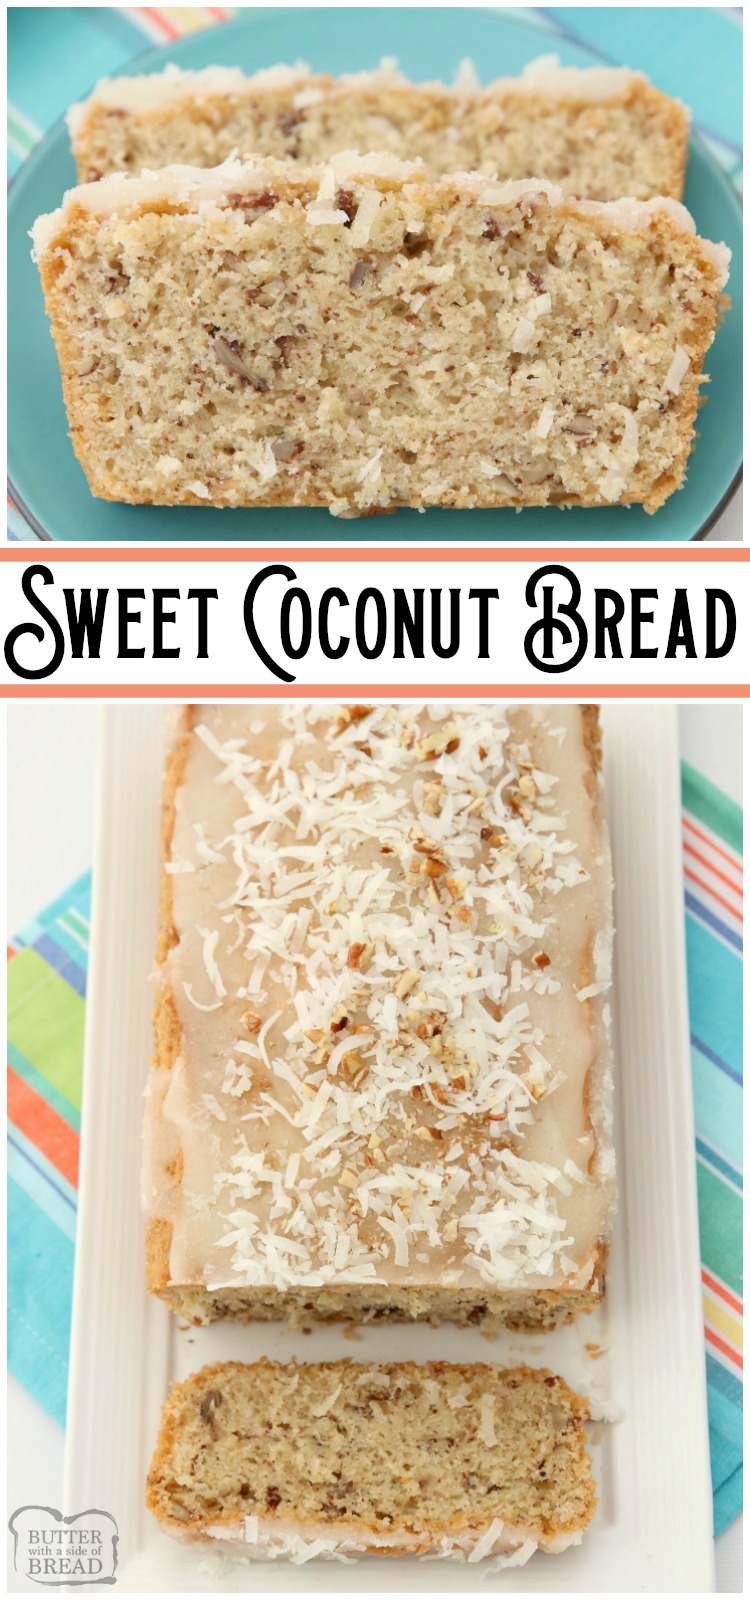 Sweet Coconut Bread is a moist sweet bread made with milk, flour, coconut and pecans. Topped with a sweet coconut glaze, flake coconut and more pecans, you won't be able to resist a slice! #coconut #bread #sweetbread #sweet #quickbread #baking #recipe from BUTTER WITH A SIDE OF BREAD